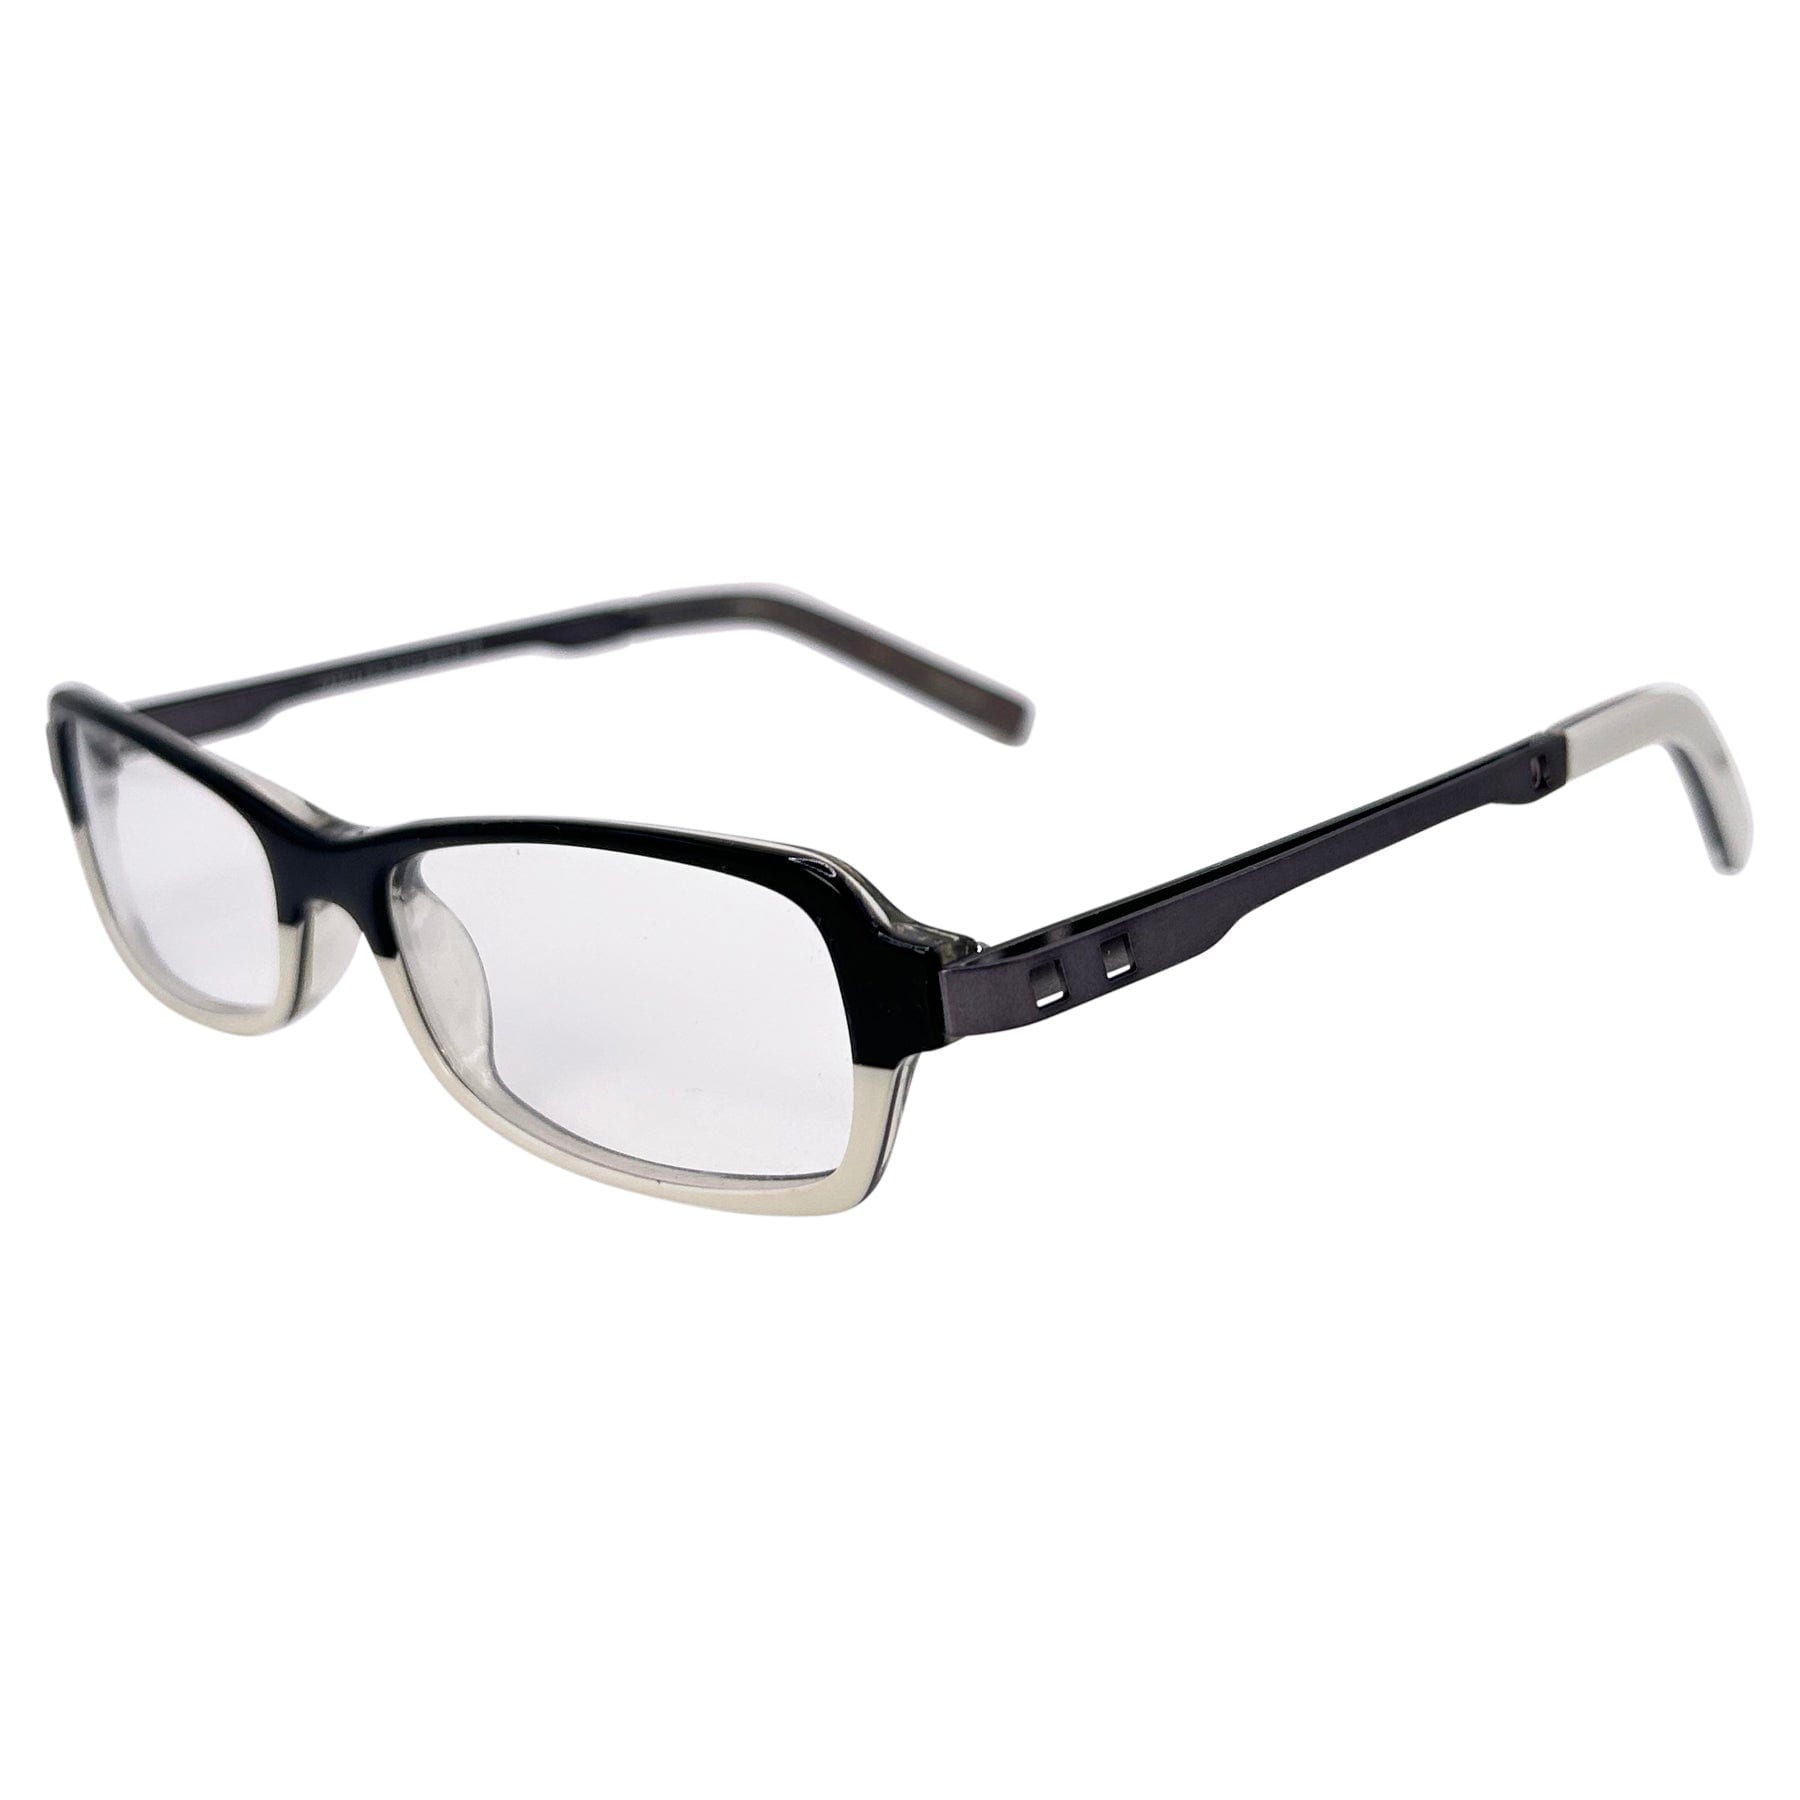 black and white color glasses with a square 90s style frame